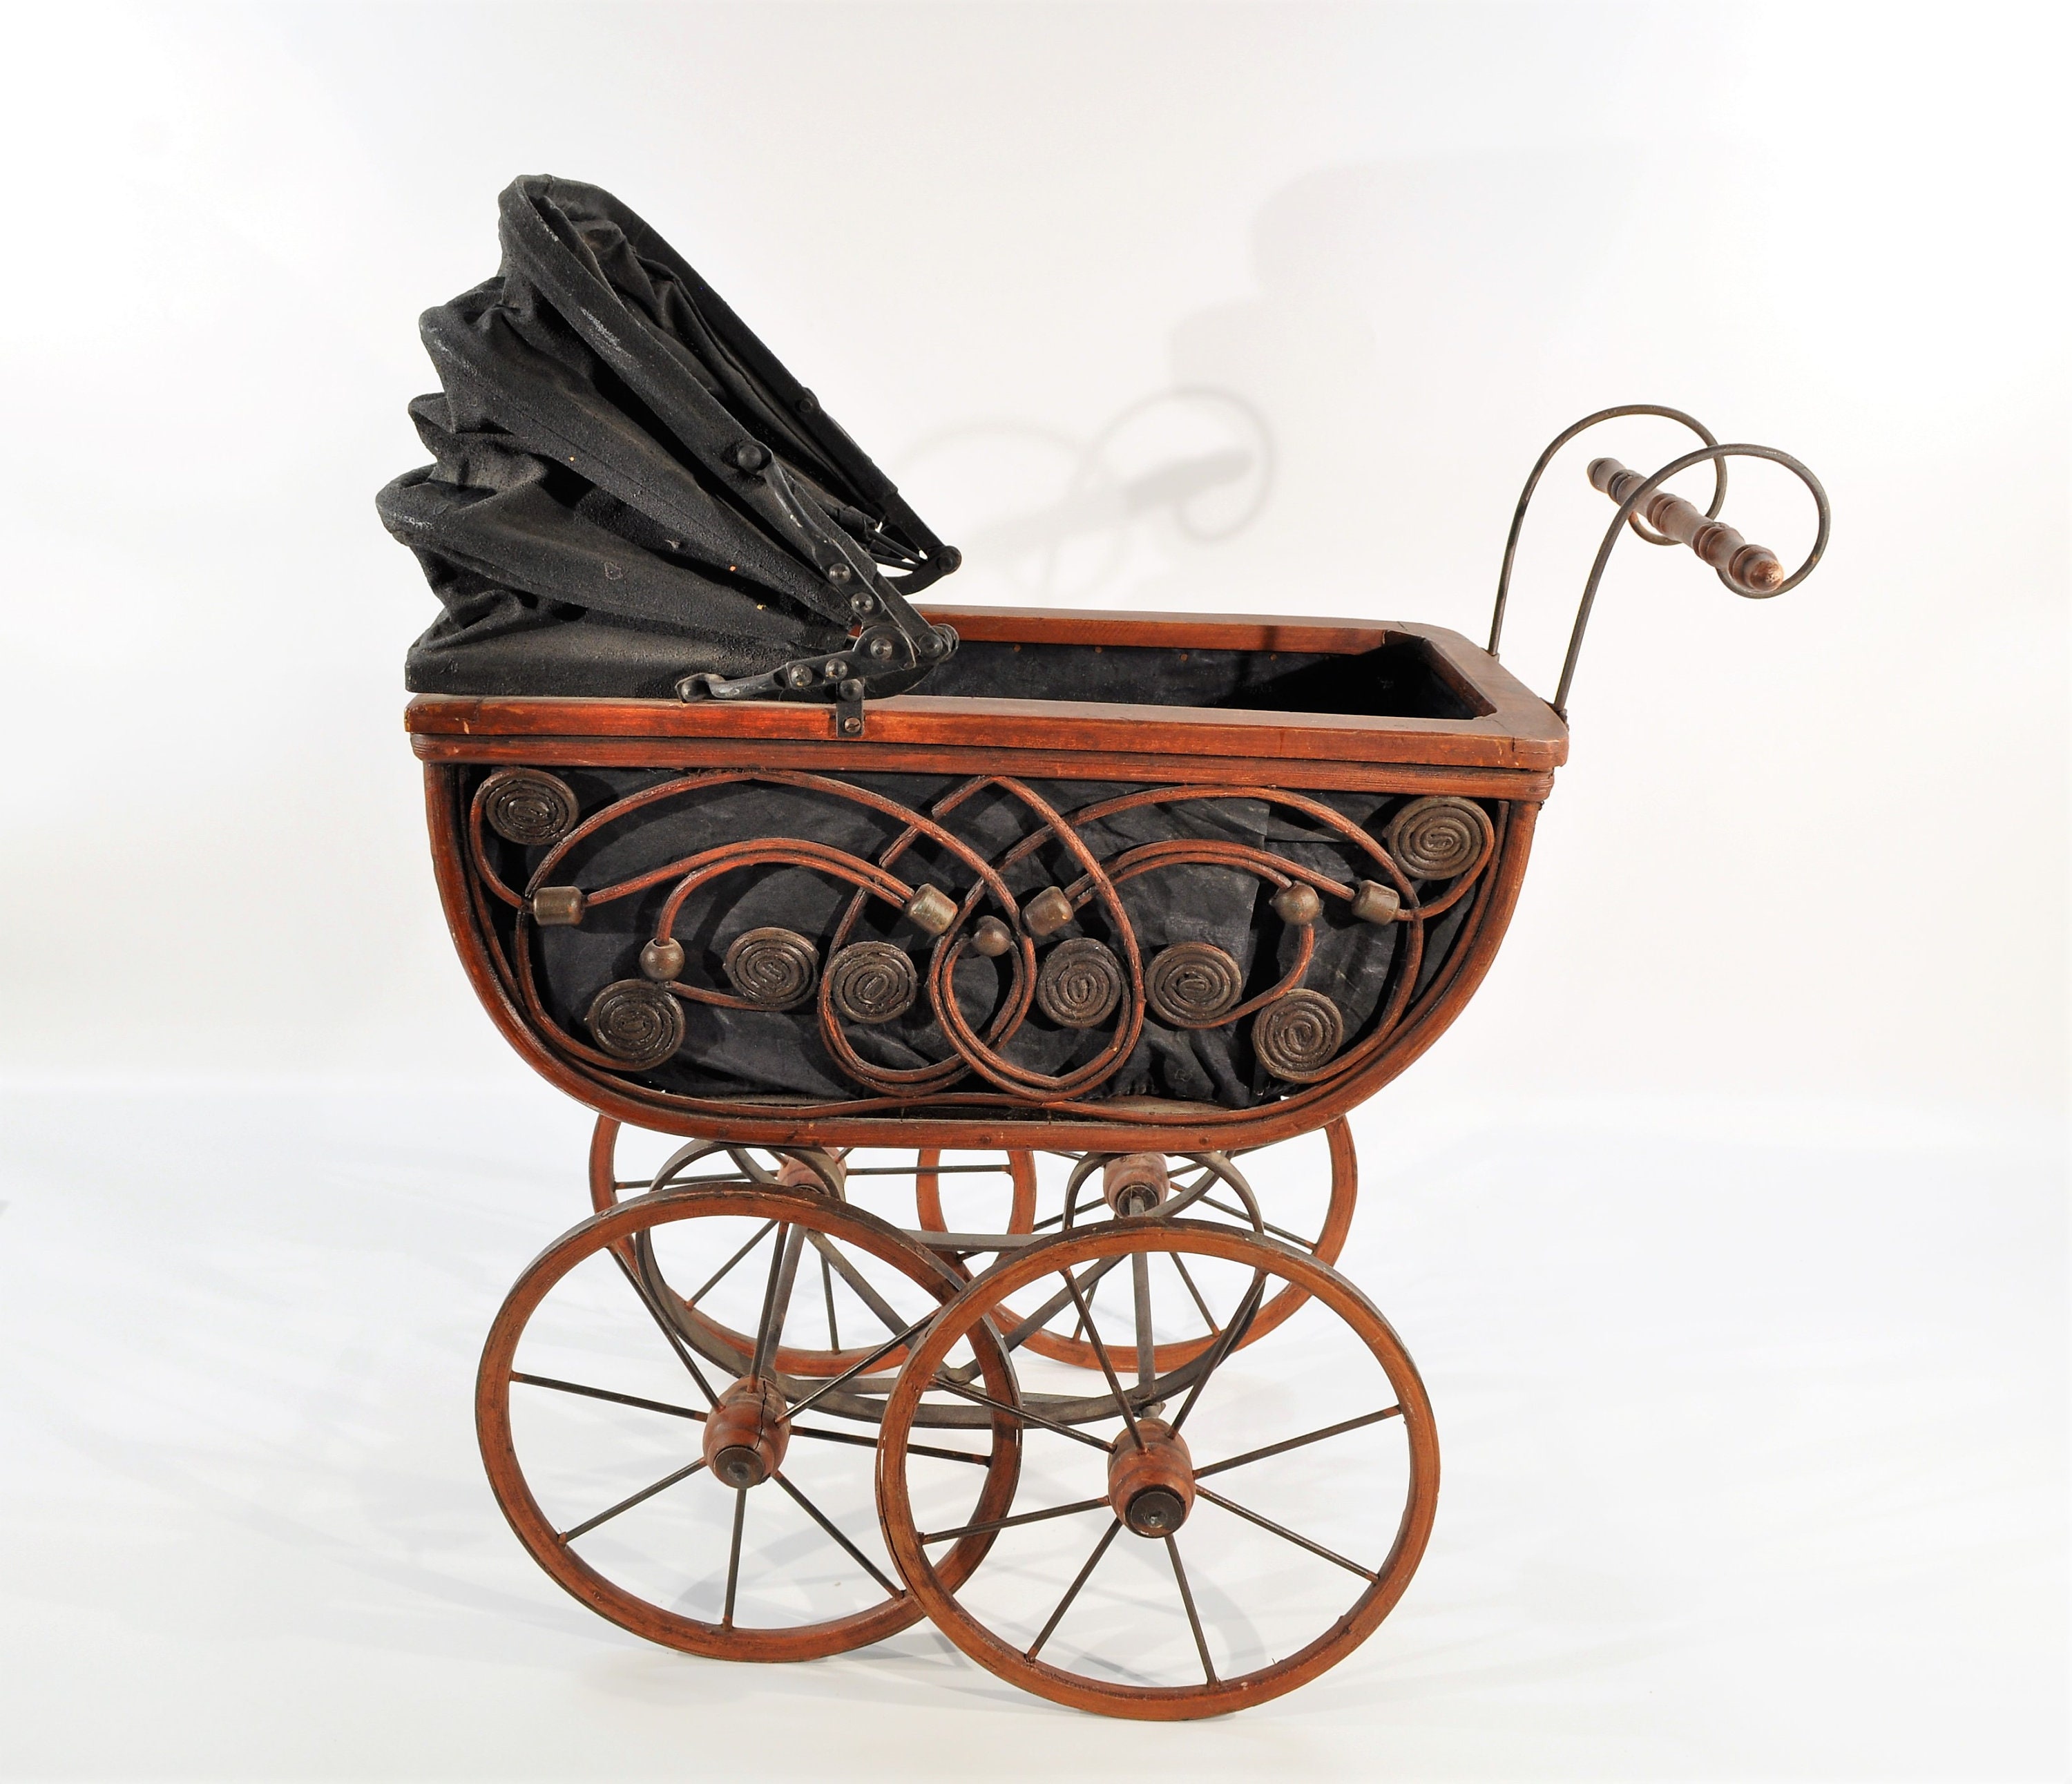 Collectible Baby Carriages & Buggies for sale